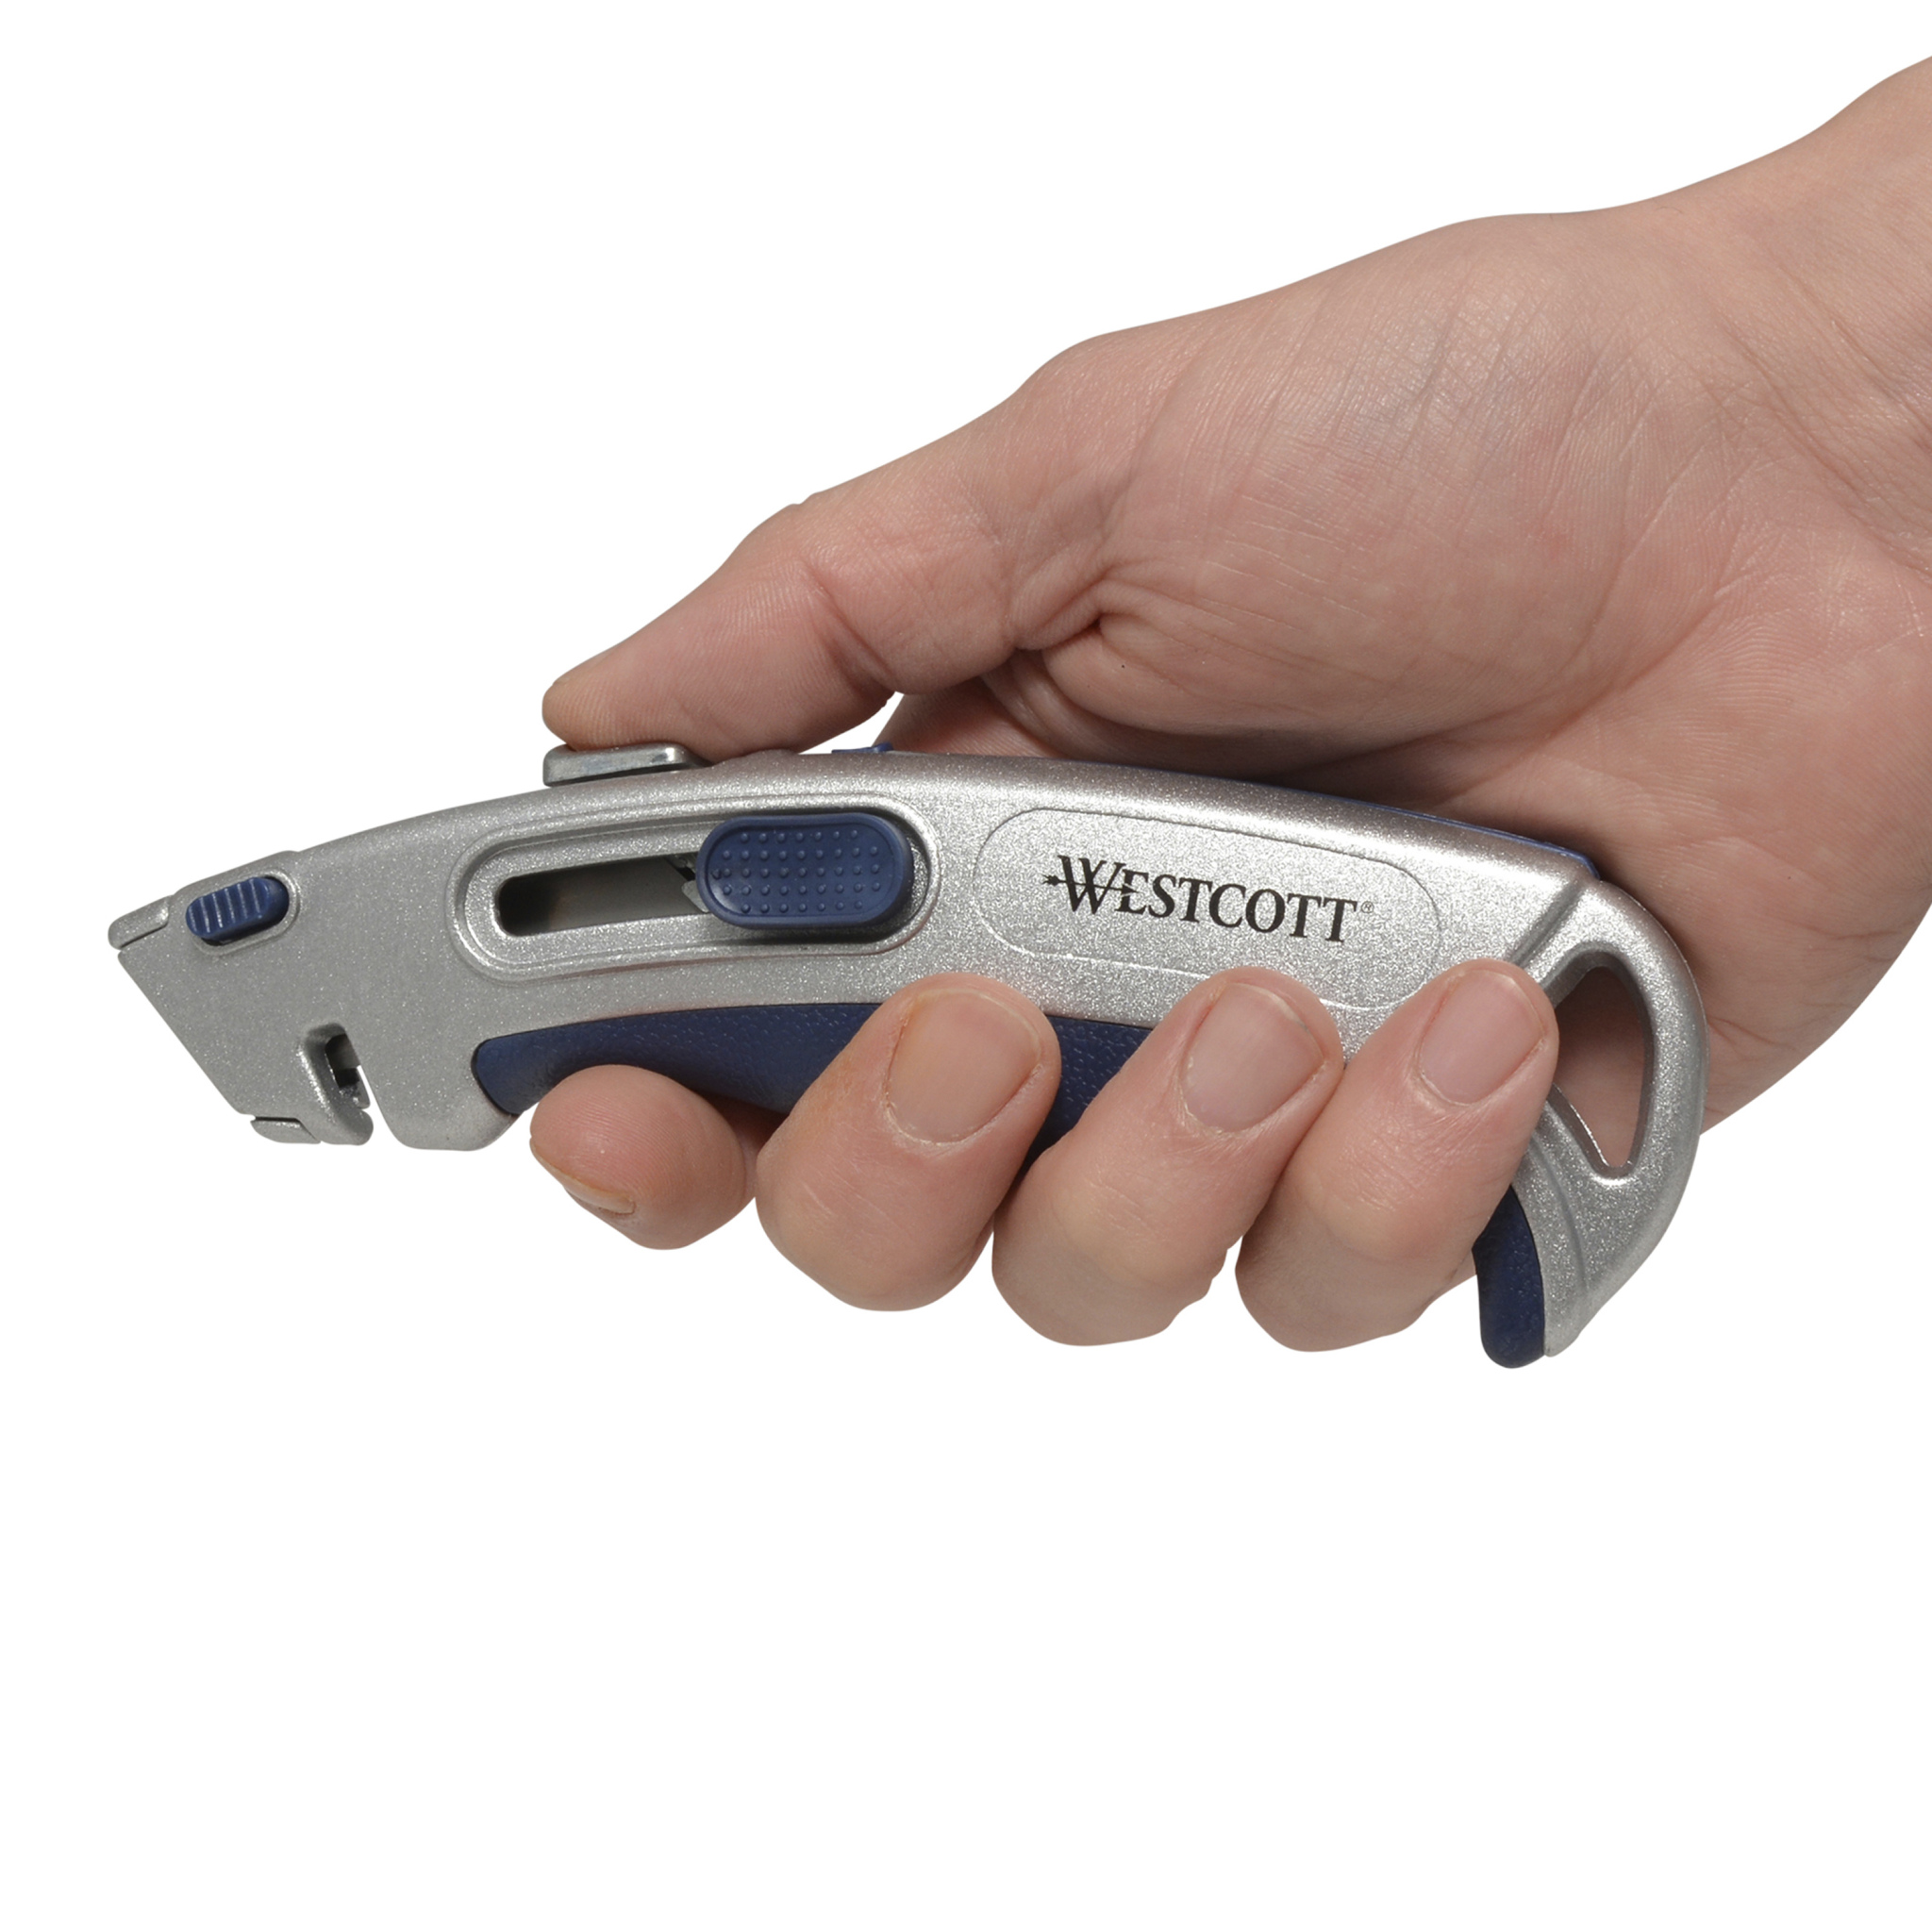 Westcott Heavy Duty Utility Cutter, Silver, 3 Blades, for Office, 8.86 inches, 1-Count - image 5 of 8